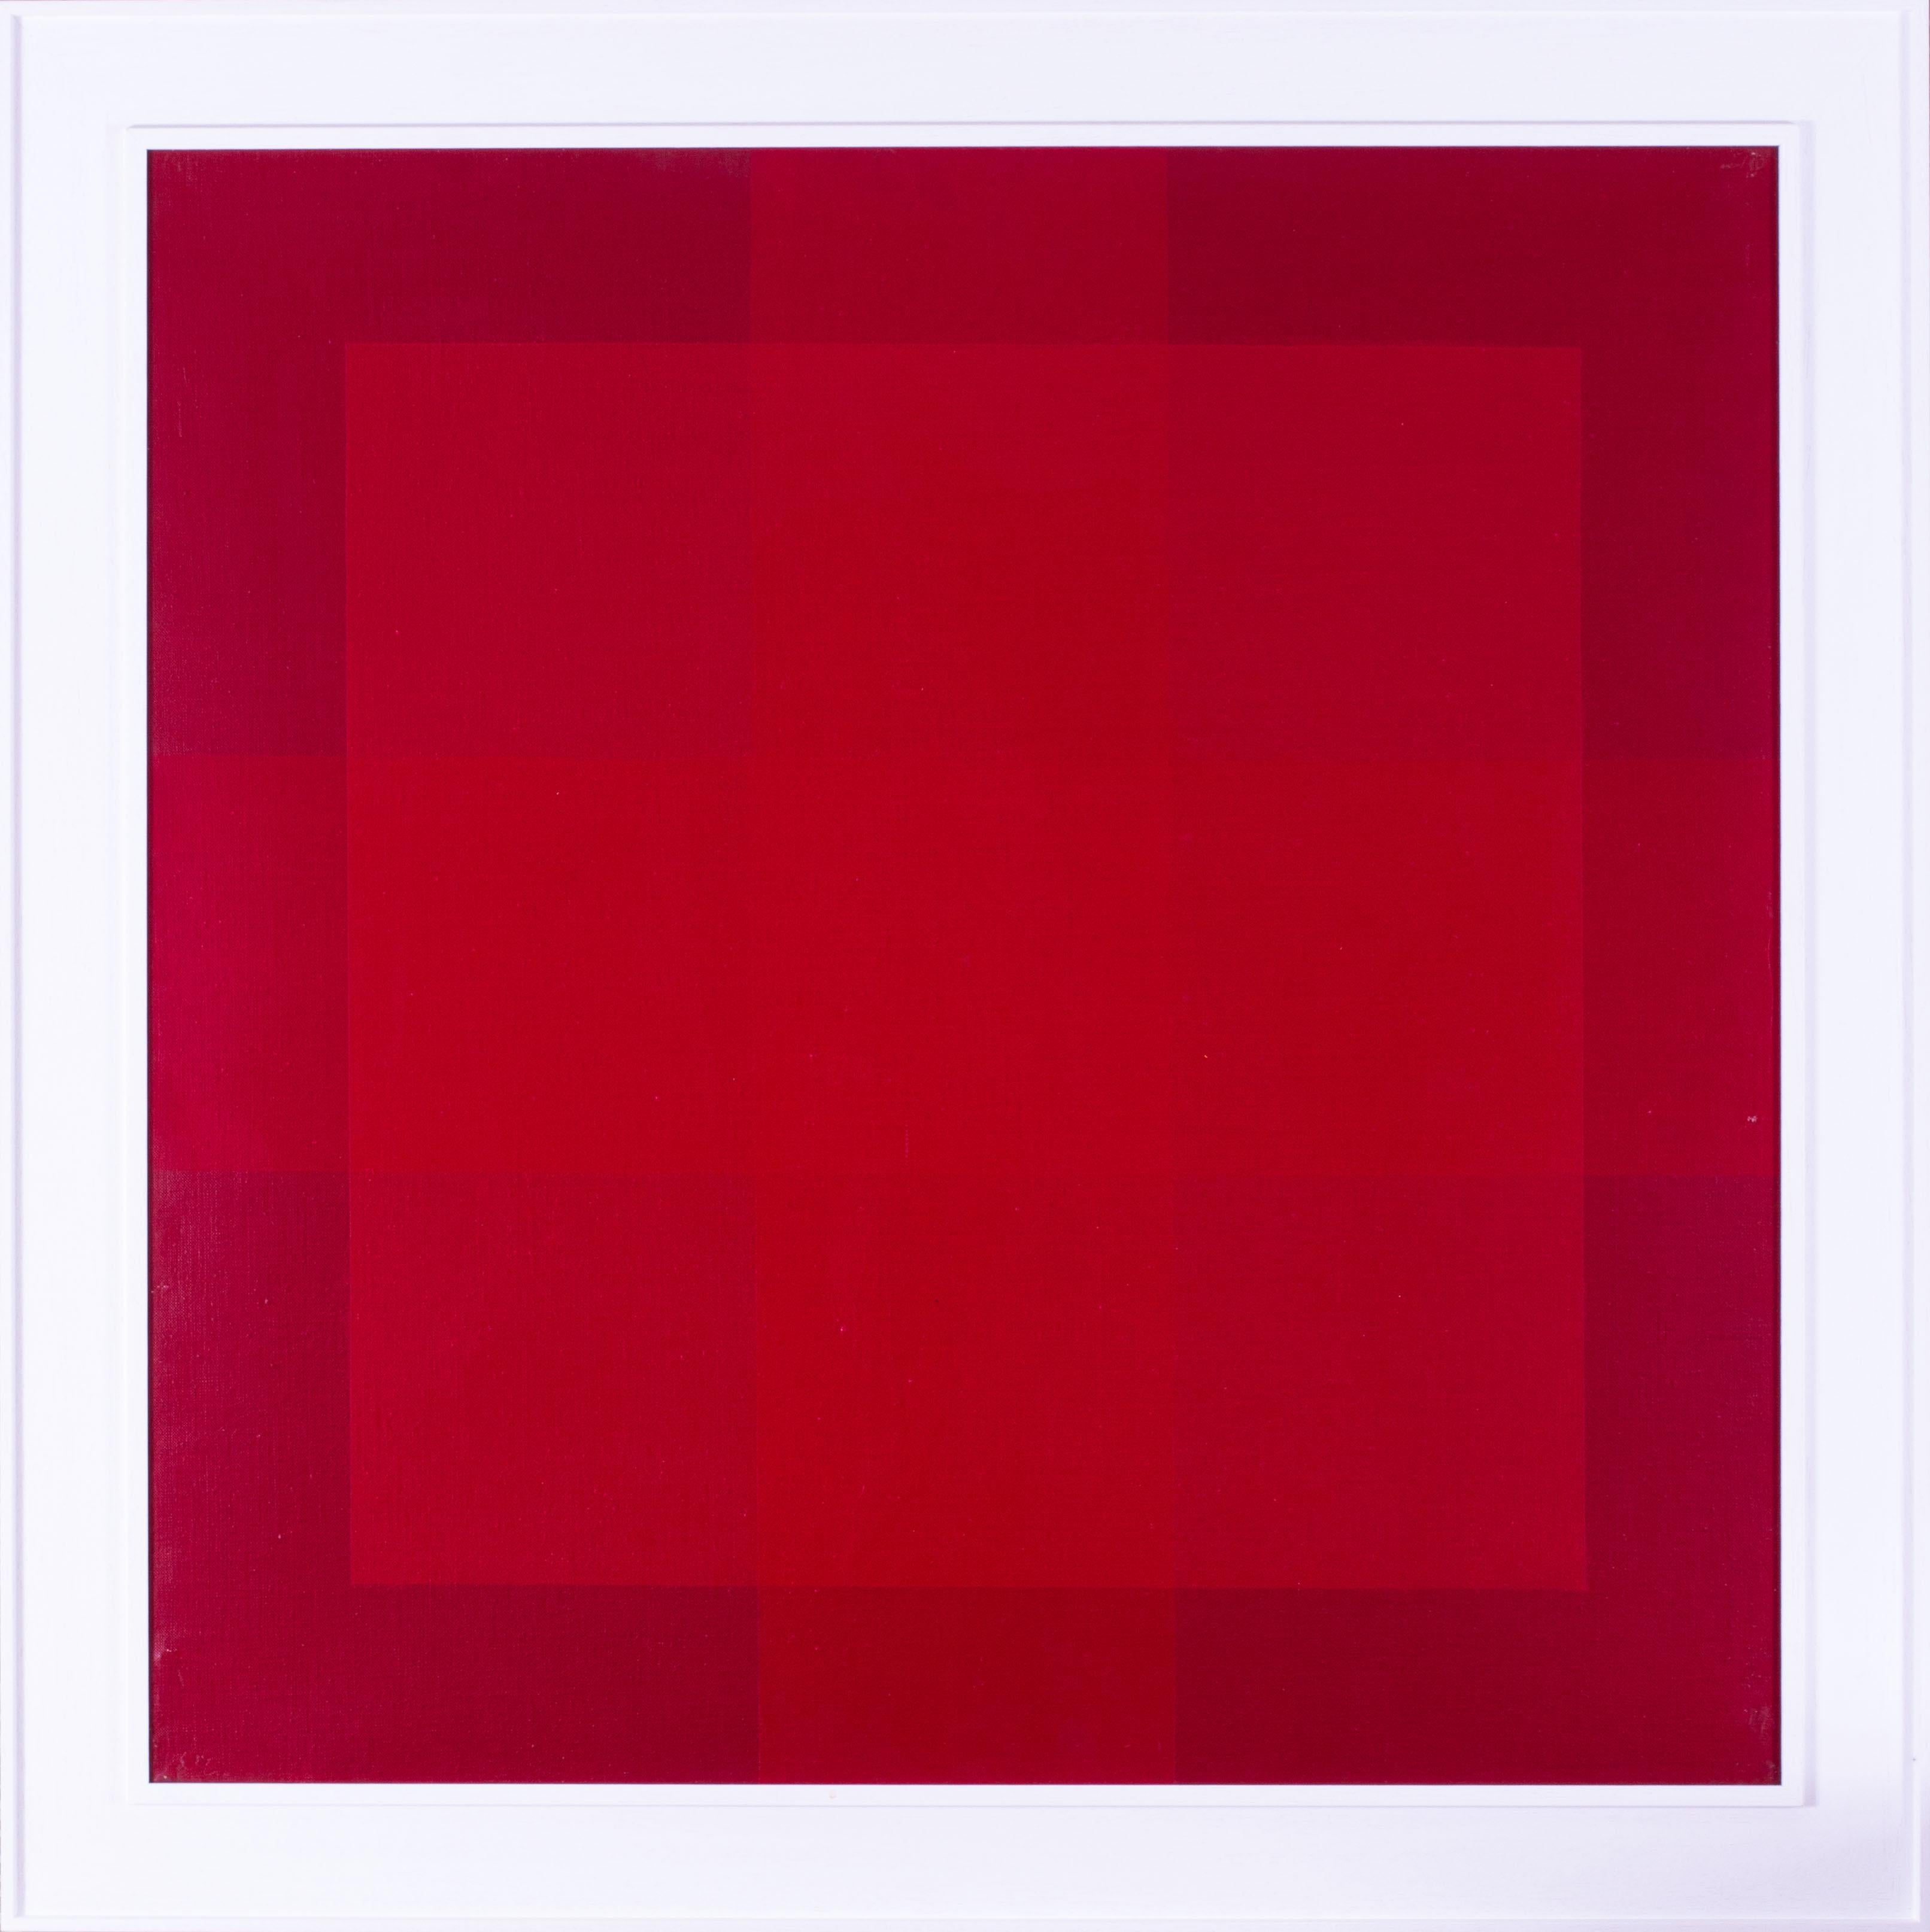 Claire Pichaud (French 1935 – 2017)
Red abstract 
Acrylic on canvas
Squares and diamond lozenge
Signed ‘Claire Pichaud’ (on the stretcher)
31.1/2 x 31.1/2 in. (80 x 80 cm.)

Further examples by the artist (also in red) are available.
